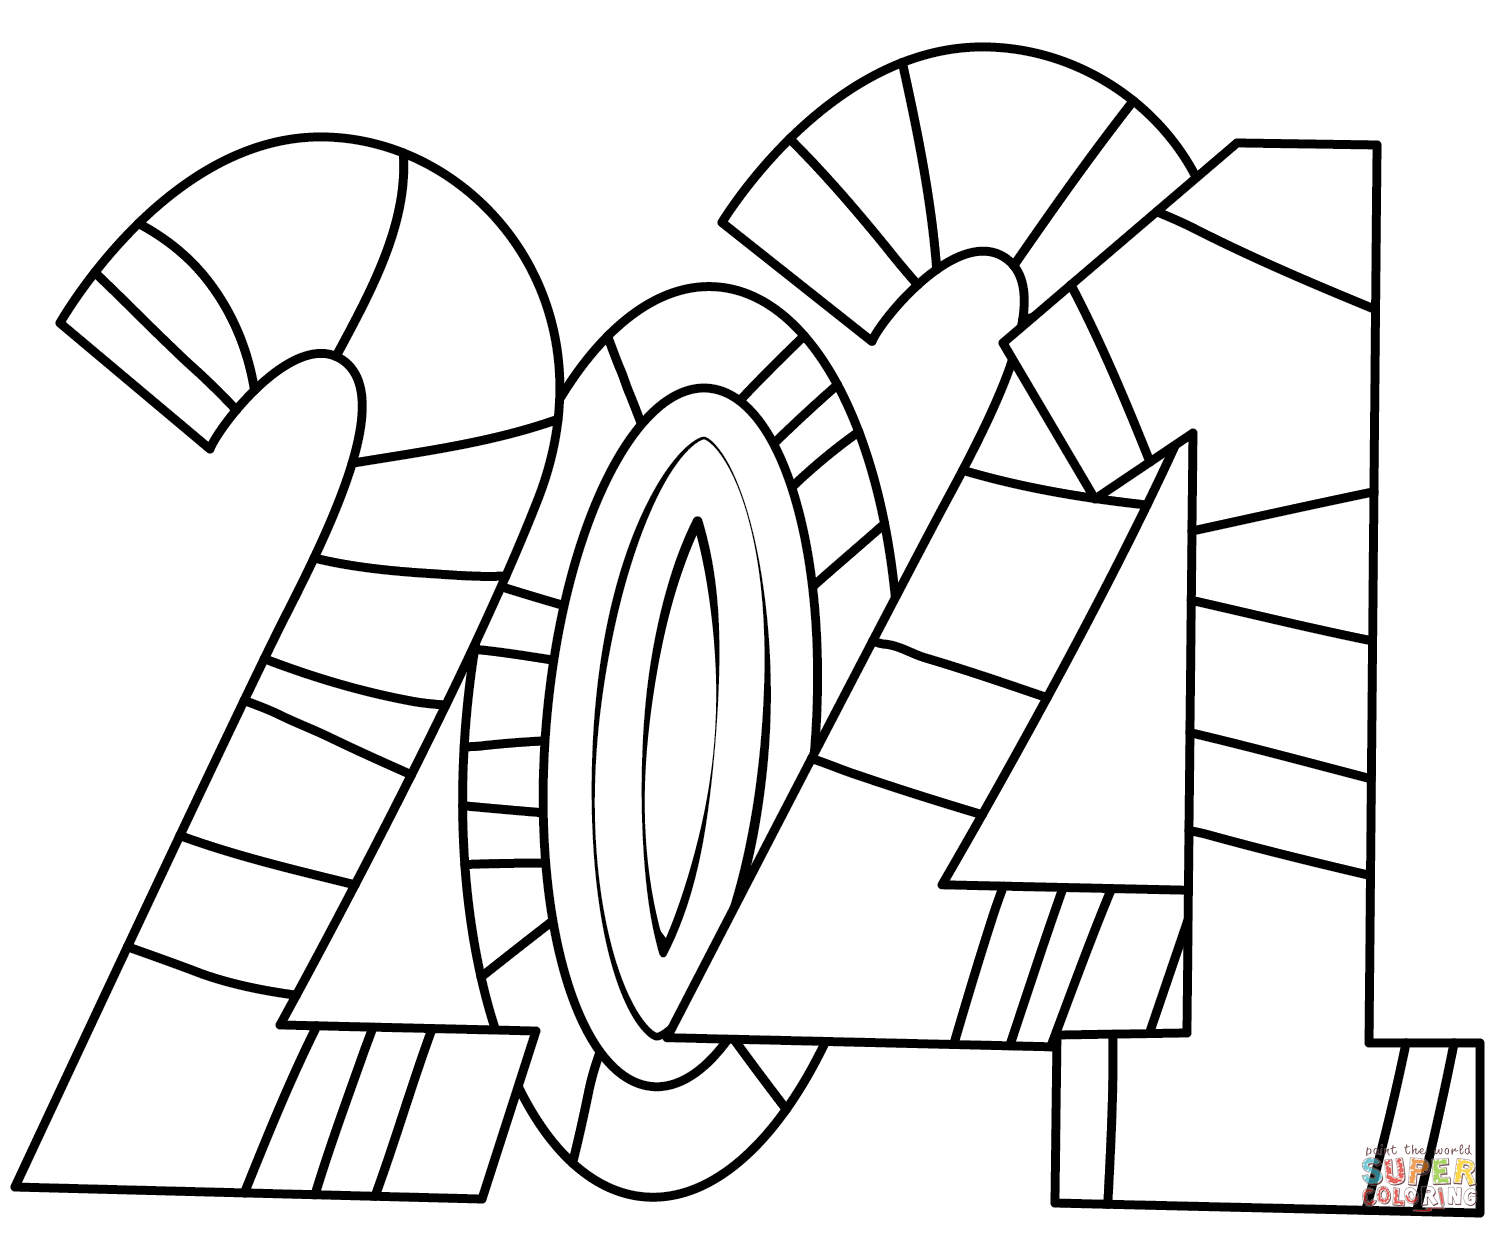 2021 Coloring Pages - Coloring Home